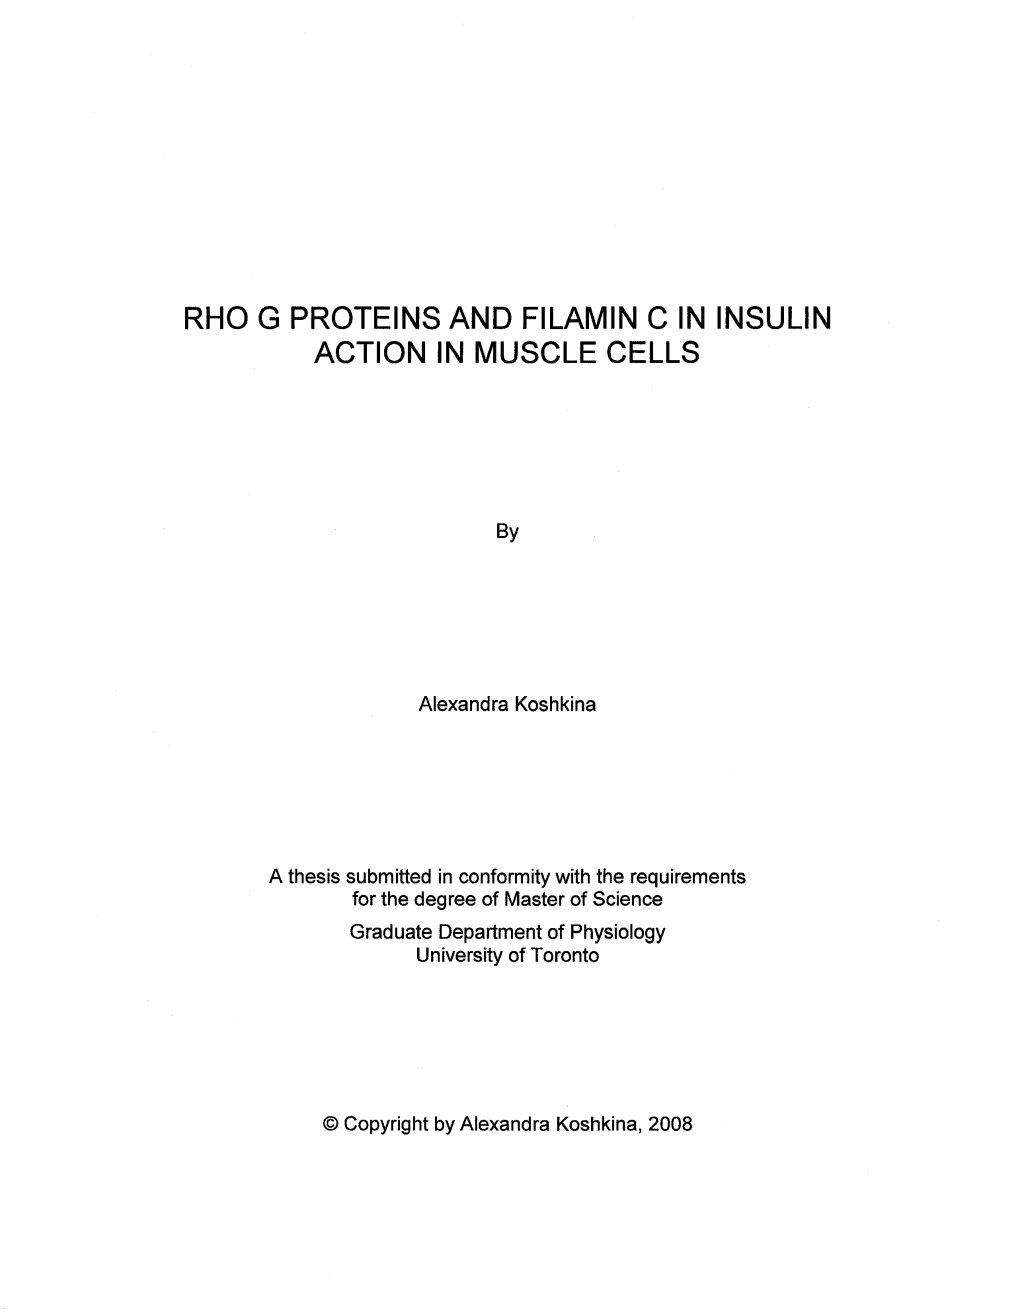 Rho G Proteins and Filamin C in Insulin Action in Muscle Cells